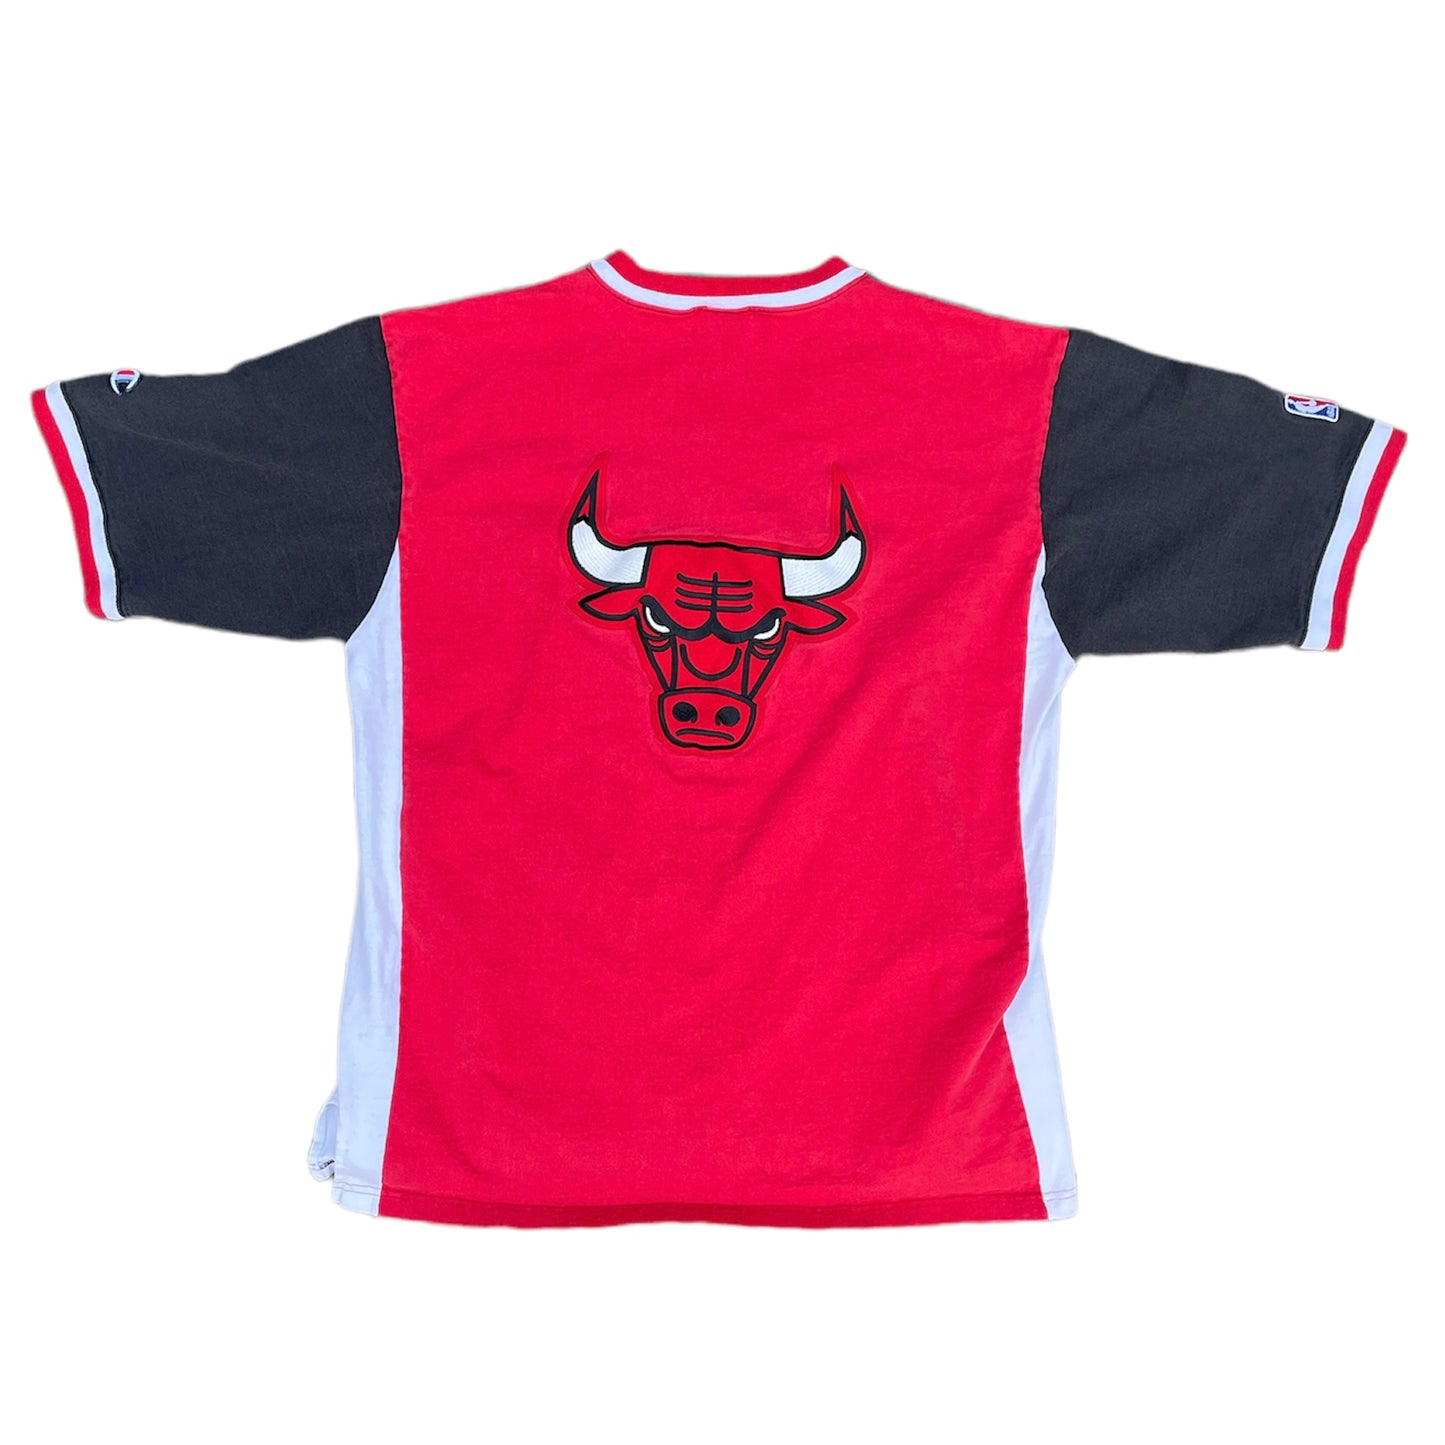 Vintage Champion - Chicago Bulls Official Shooting Shirt of The NBA Jersey 1990s Medium